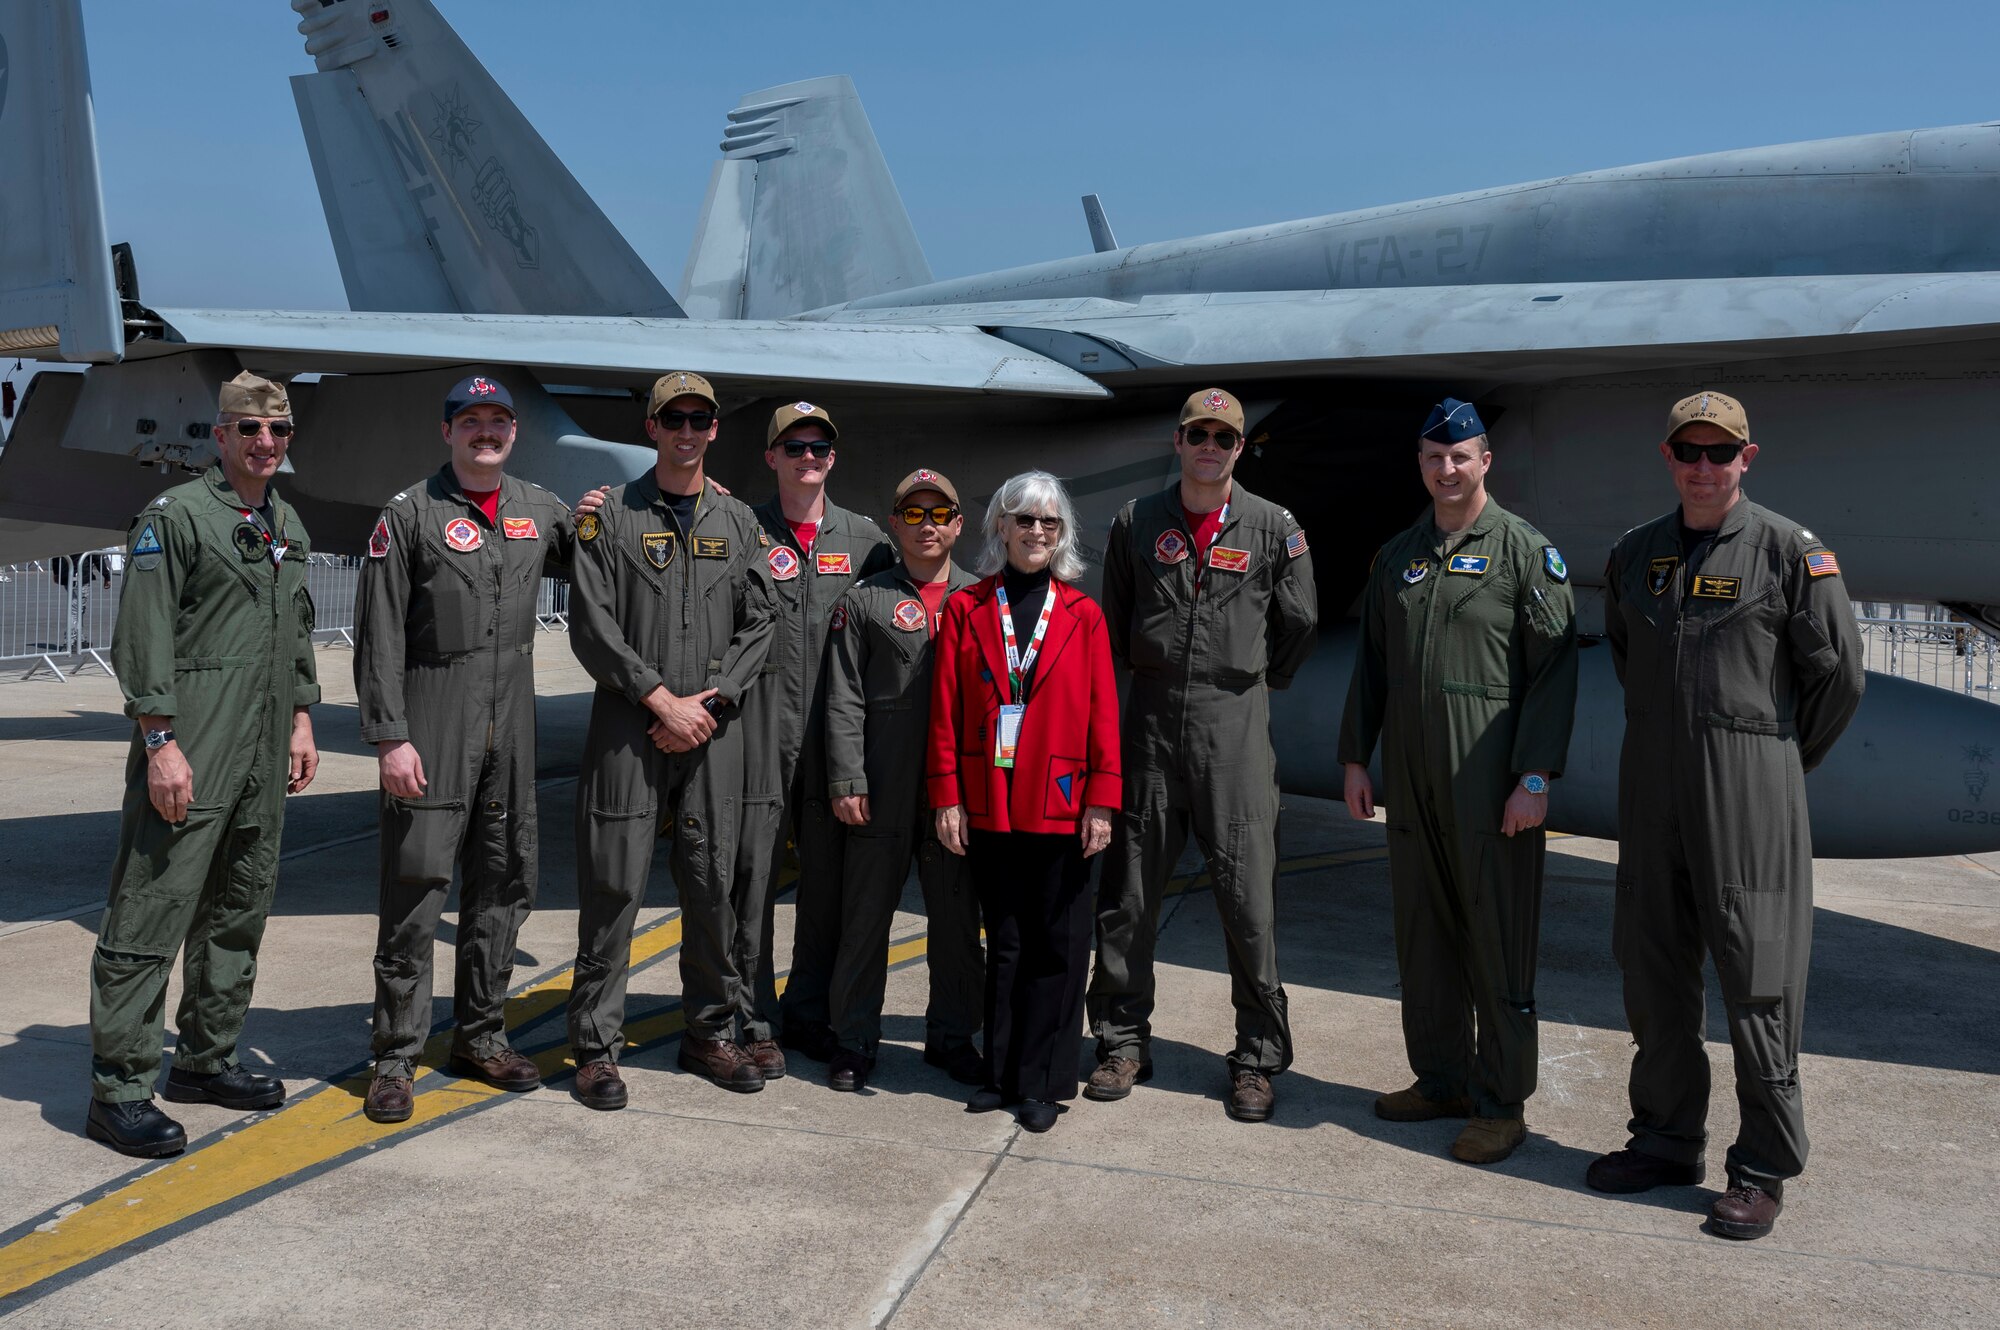 A group photo of U.S. personnel during Aero India 23